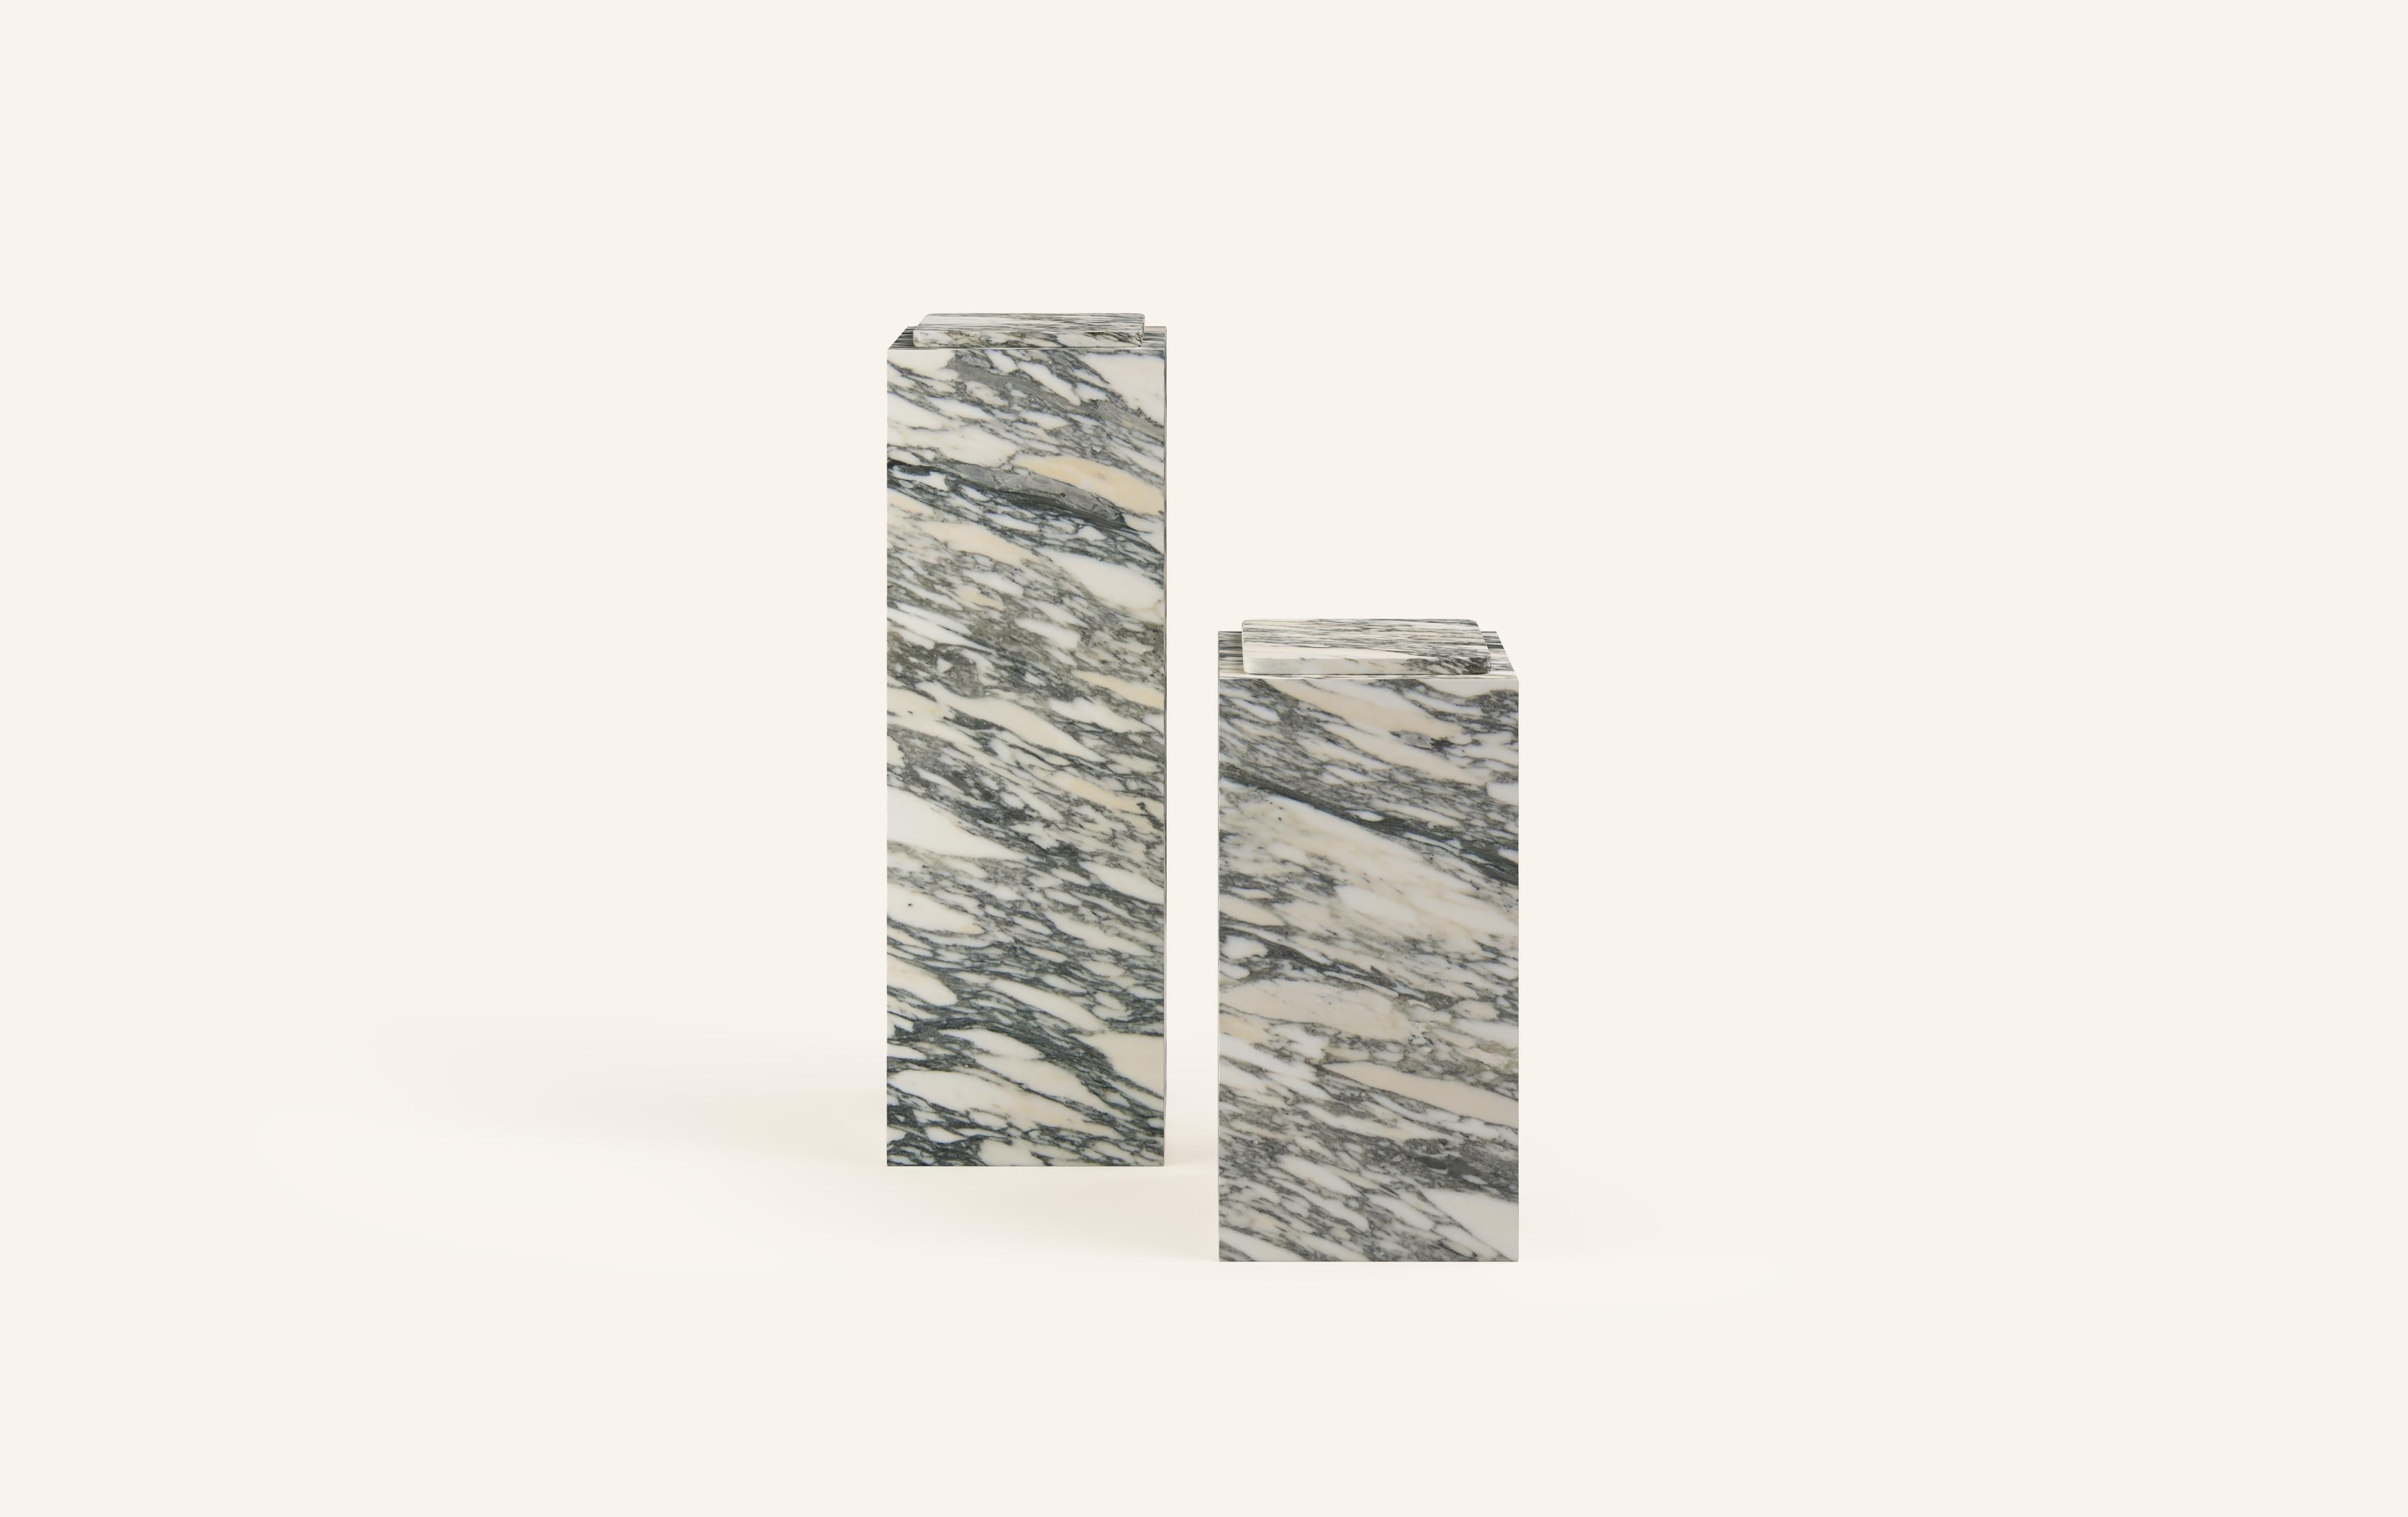 MONOLITHIC FORMS SOFTENED BY GENTLE EDGES. WITH ITS BOLD MARBLE PATTERNS CUBO IS AS VERSATILE AS IT IS STRIKING.

DIMENSIONS (PEDESTALS SOLD INDIVIDUALLY):
12”L x 12”W x 36”H: 
- 3/4